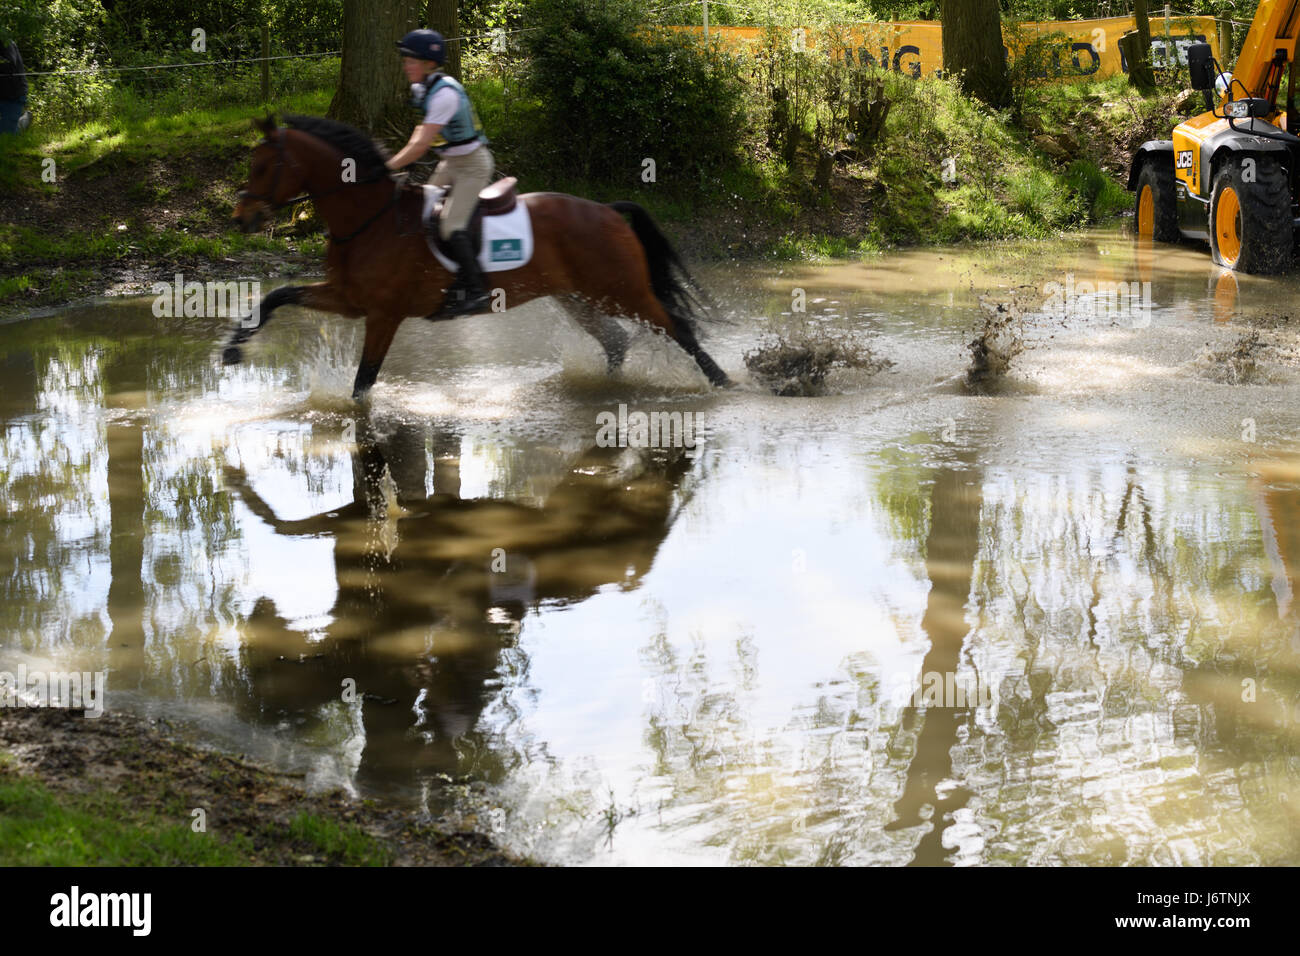 Rockingham Castle, Corby, UK. 21st May, 2017. Rider Alex Dance and his horse Count Danilo trot through the water hole on a sunny day during the cross country phase of the Rockingham International Horse Trials in the grounds of the Norman castle at Rockingham, Corby, England on 21st May 2017. Credit: miscellany/Alamy Live News Credit: miscellany/Alamy Live News Stock Photo